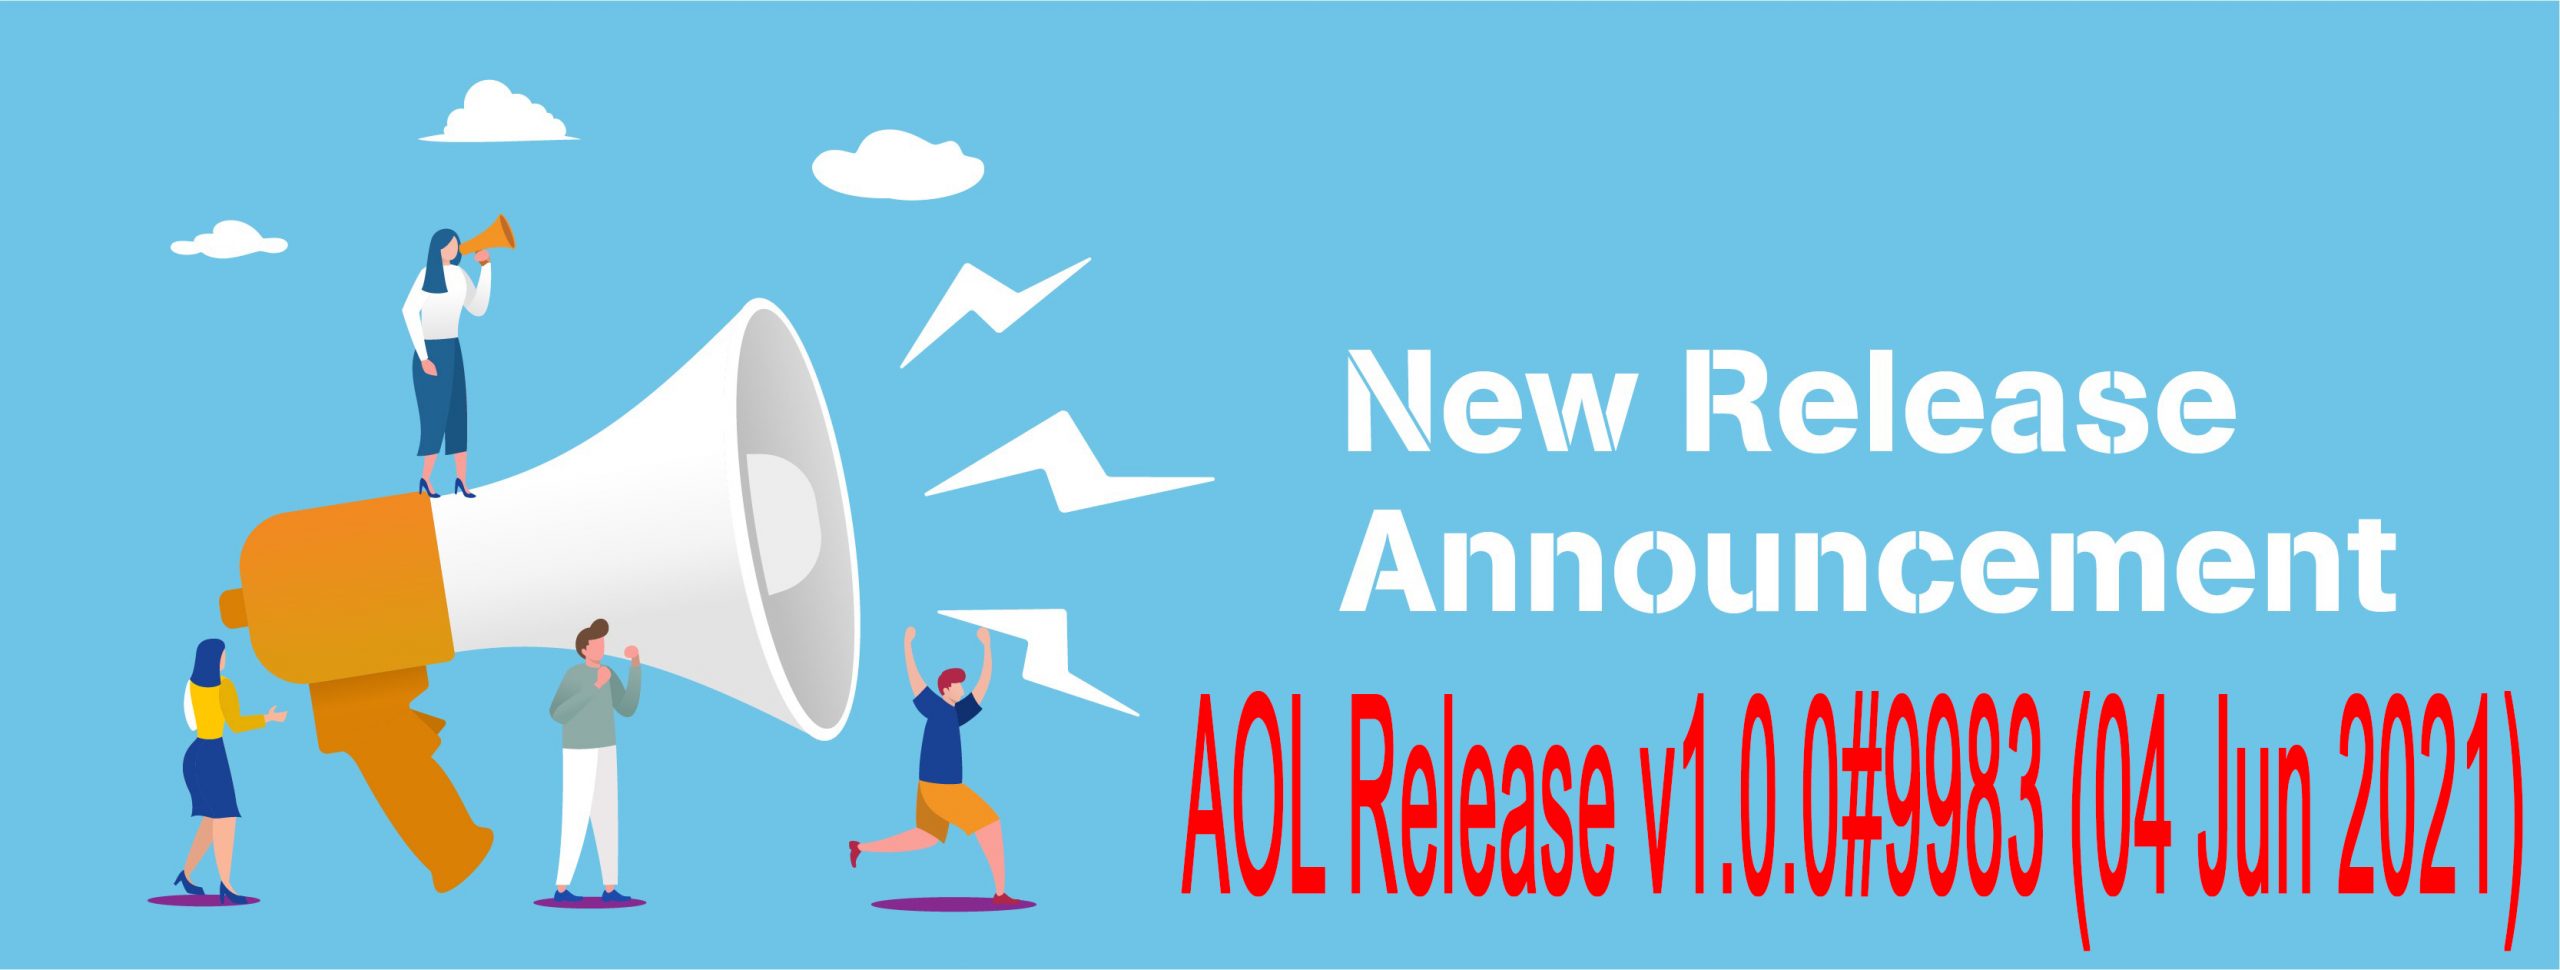 Accurate Online Release v1.0.0#9983 (04 Jun 2021)